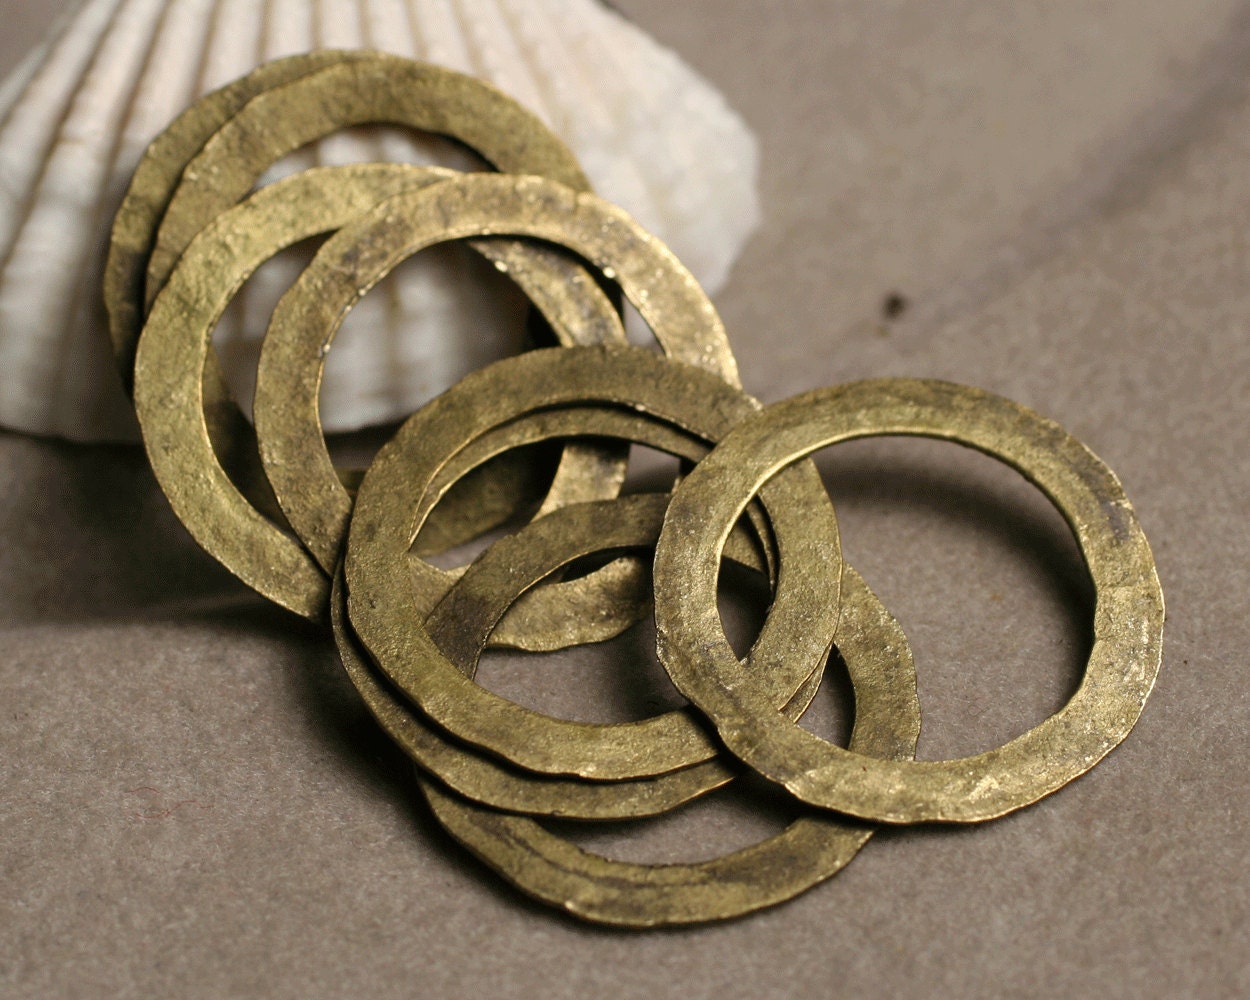 Hand hammered large antique brass ring aprox 20mm in diameter, 6 pcs (item ID ABX2702-0.5K)